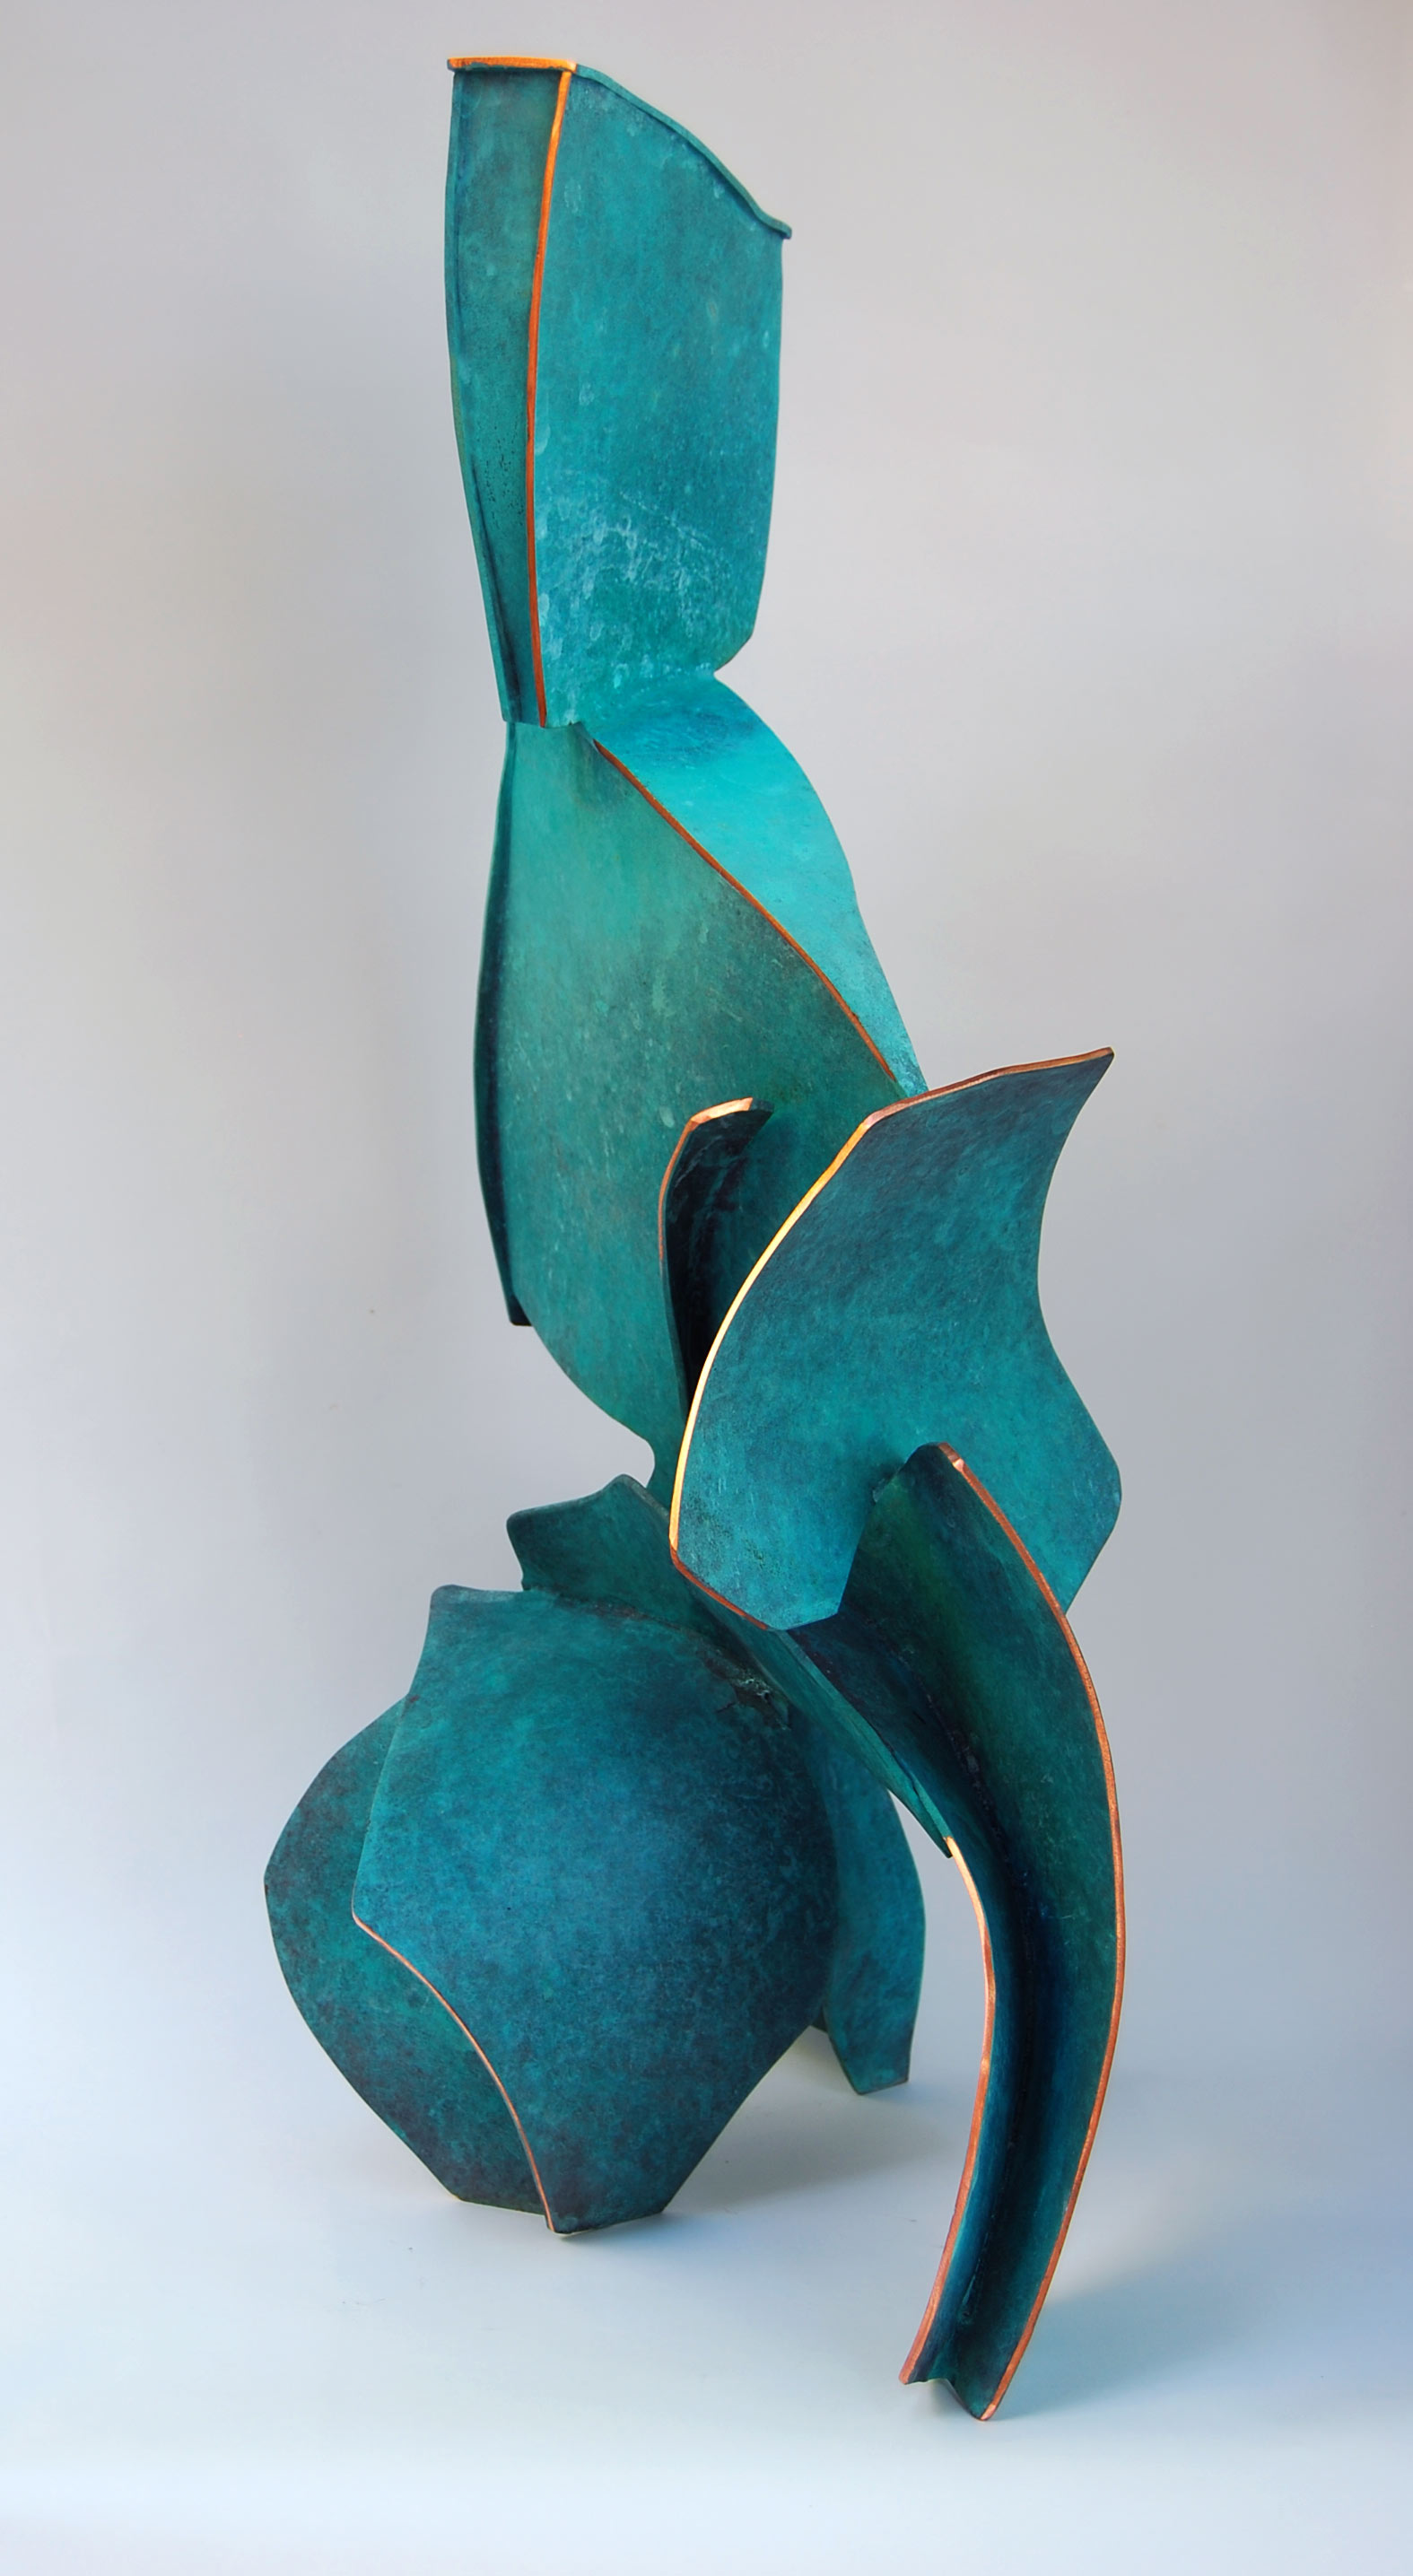 Fabricated Copper abstract sculpture